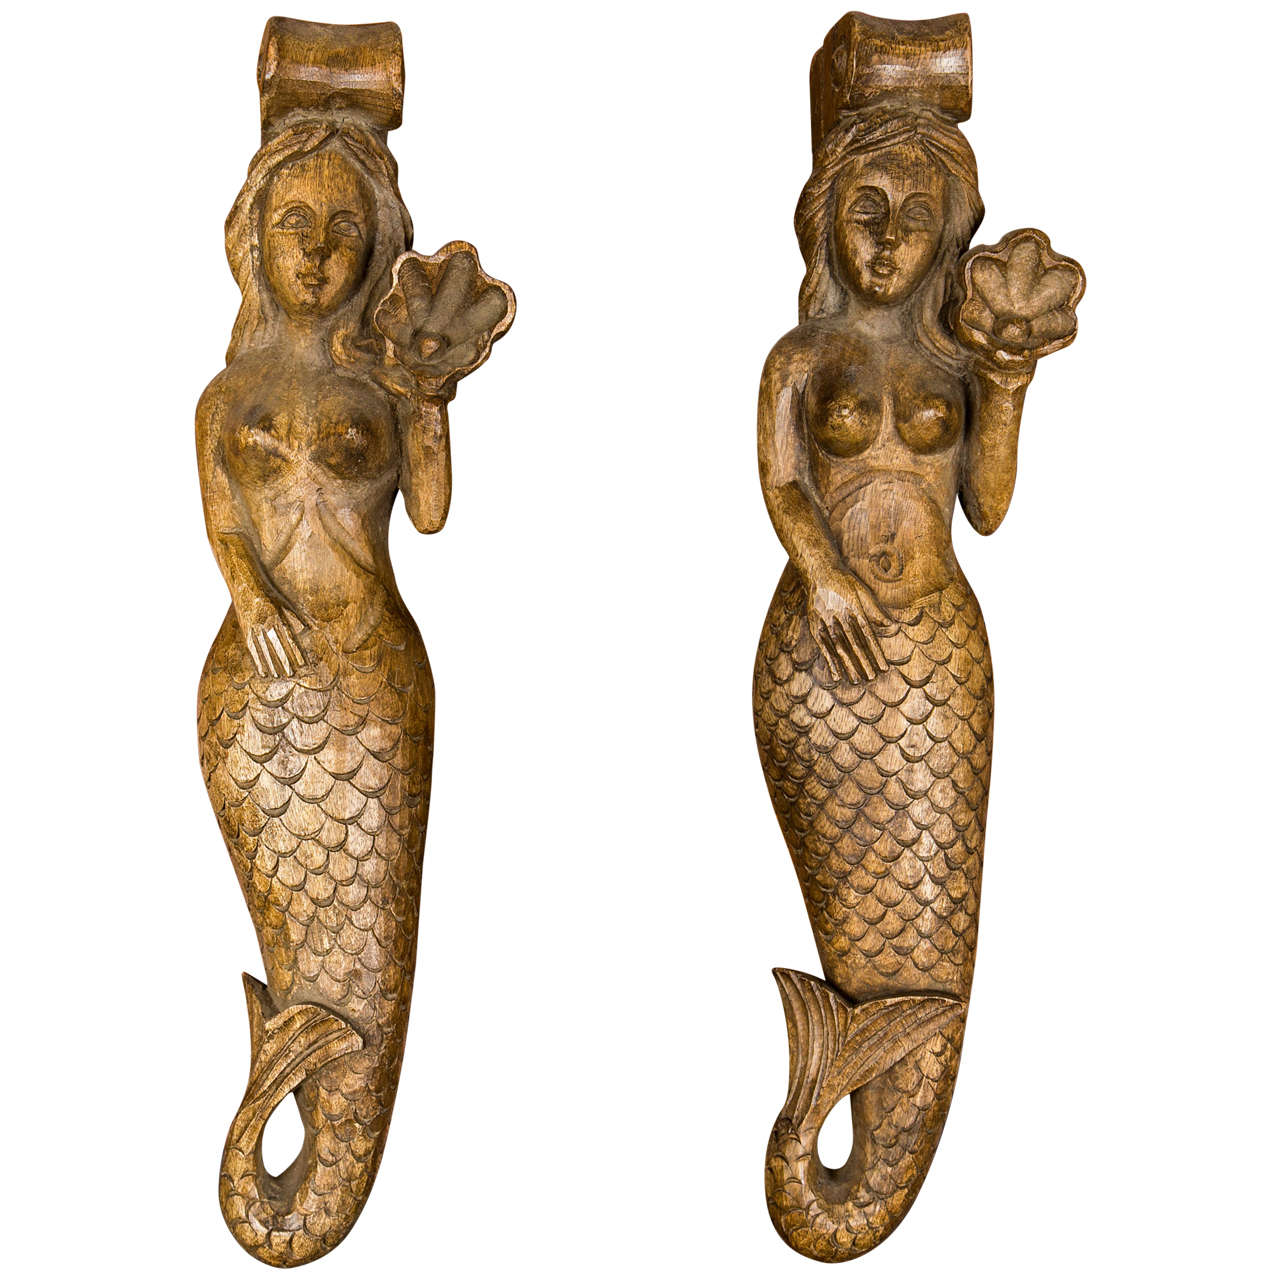 Circa 1900 Pair of Carved Wood Mermaid Sconces For Sale